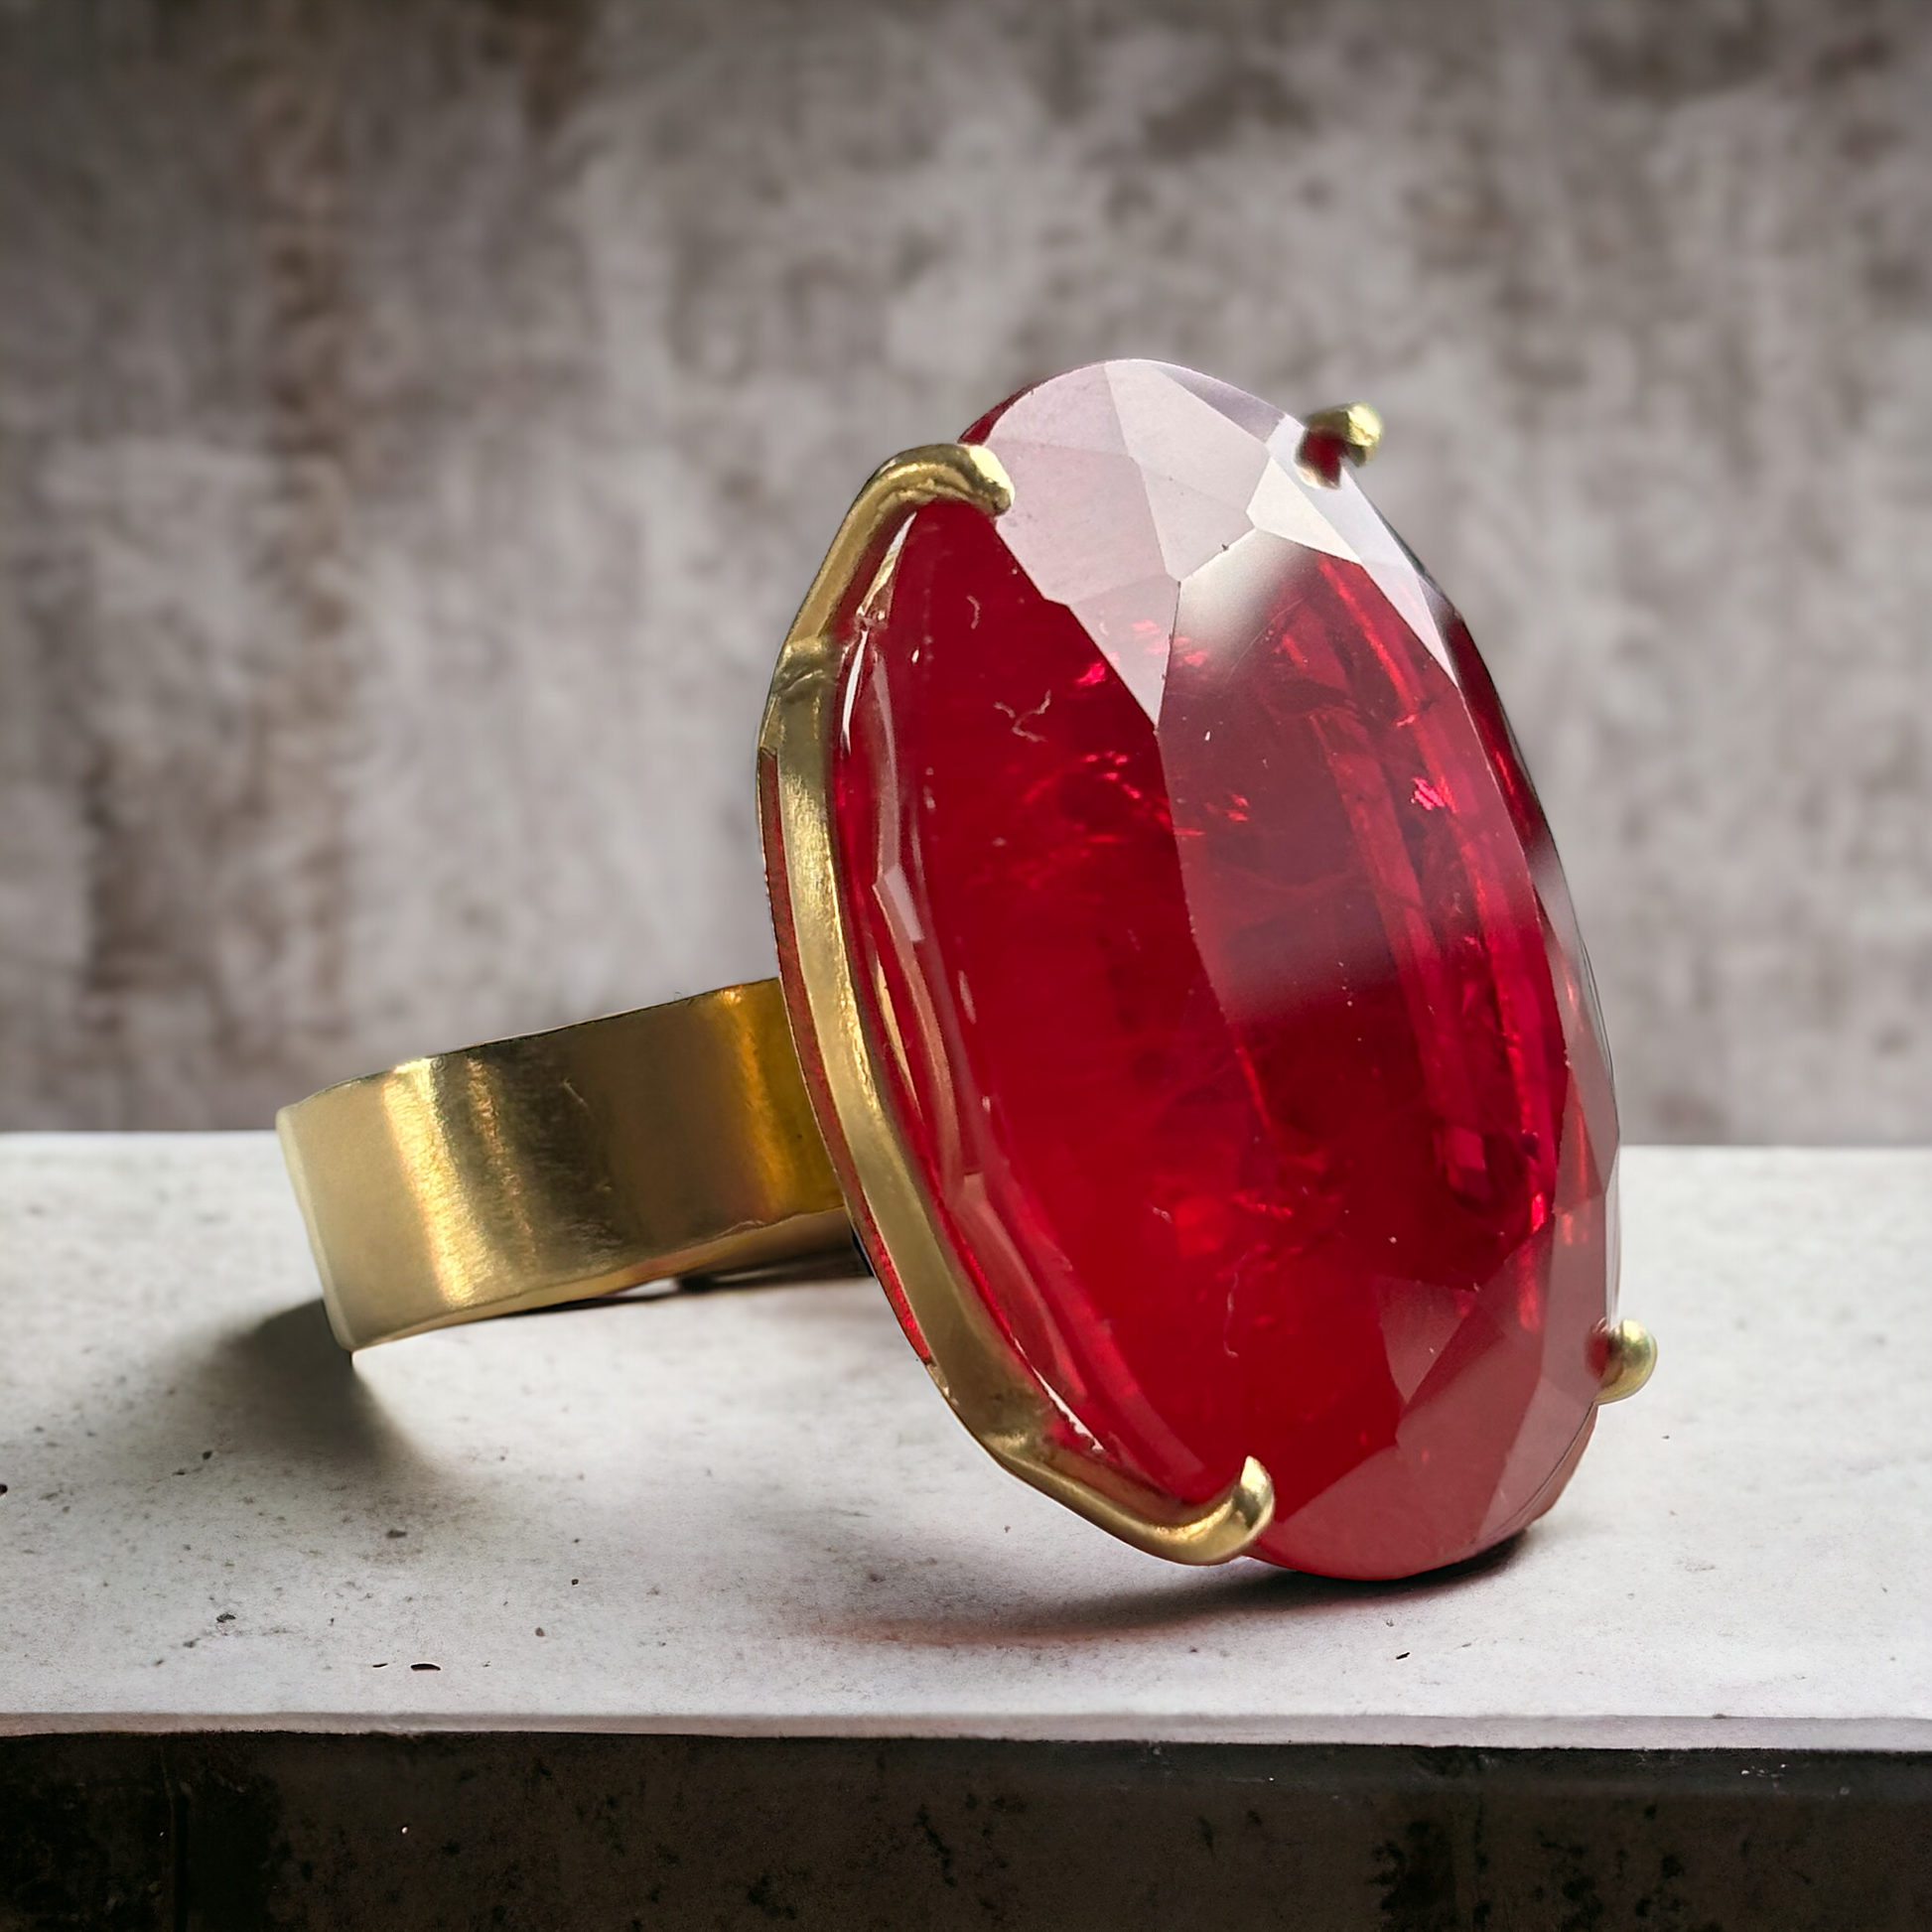 18k Yellow Gold Rubellite Ring, Large Oval Rubellite and wide band ring facing right on a grey concrete countertop